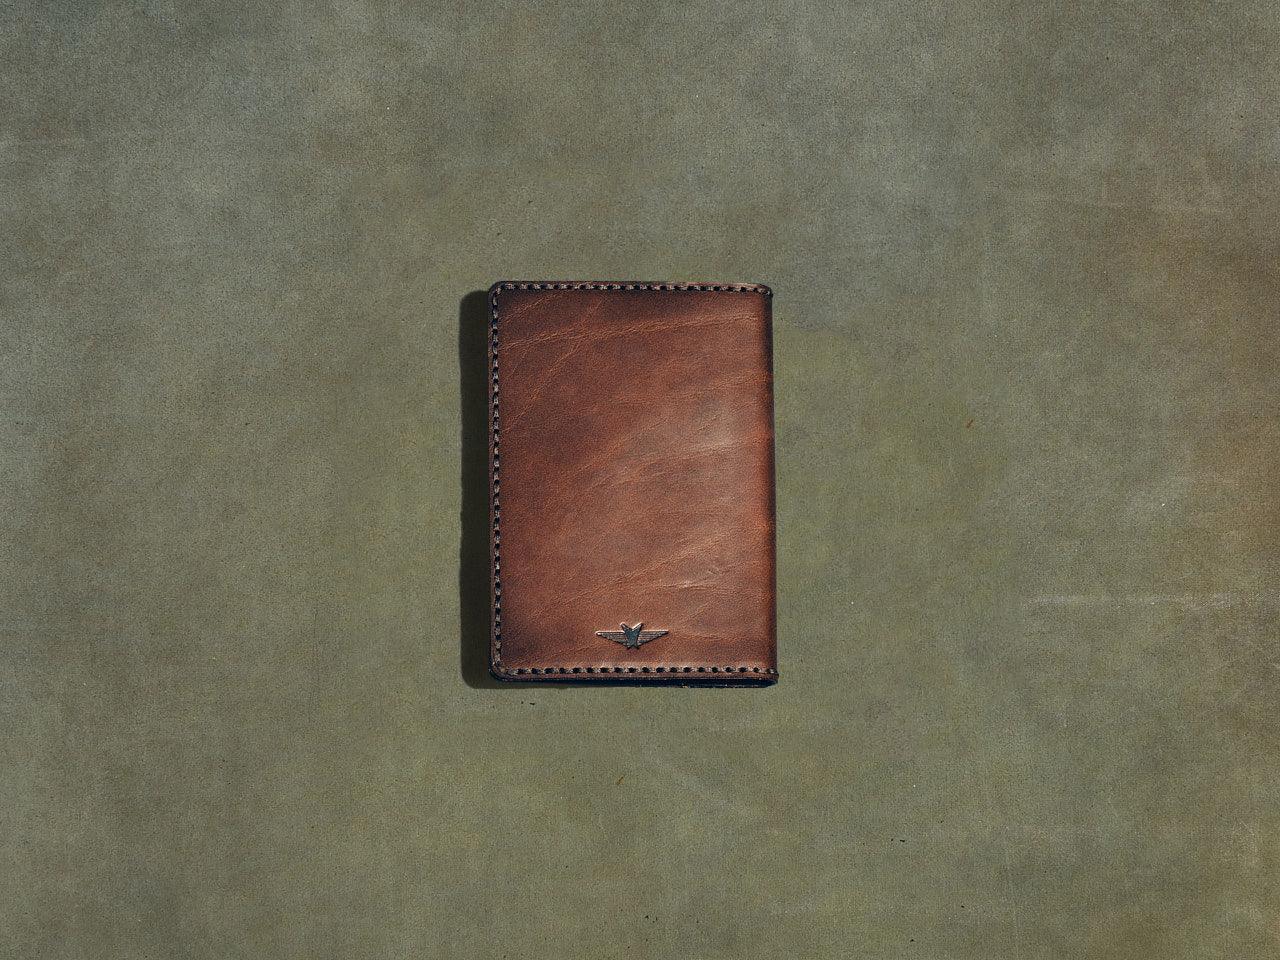 Leather Card Wallet, Men's Brown Leather Card Wallet from Satchel & Page